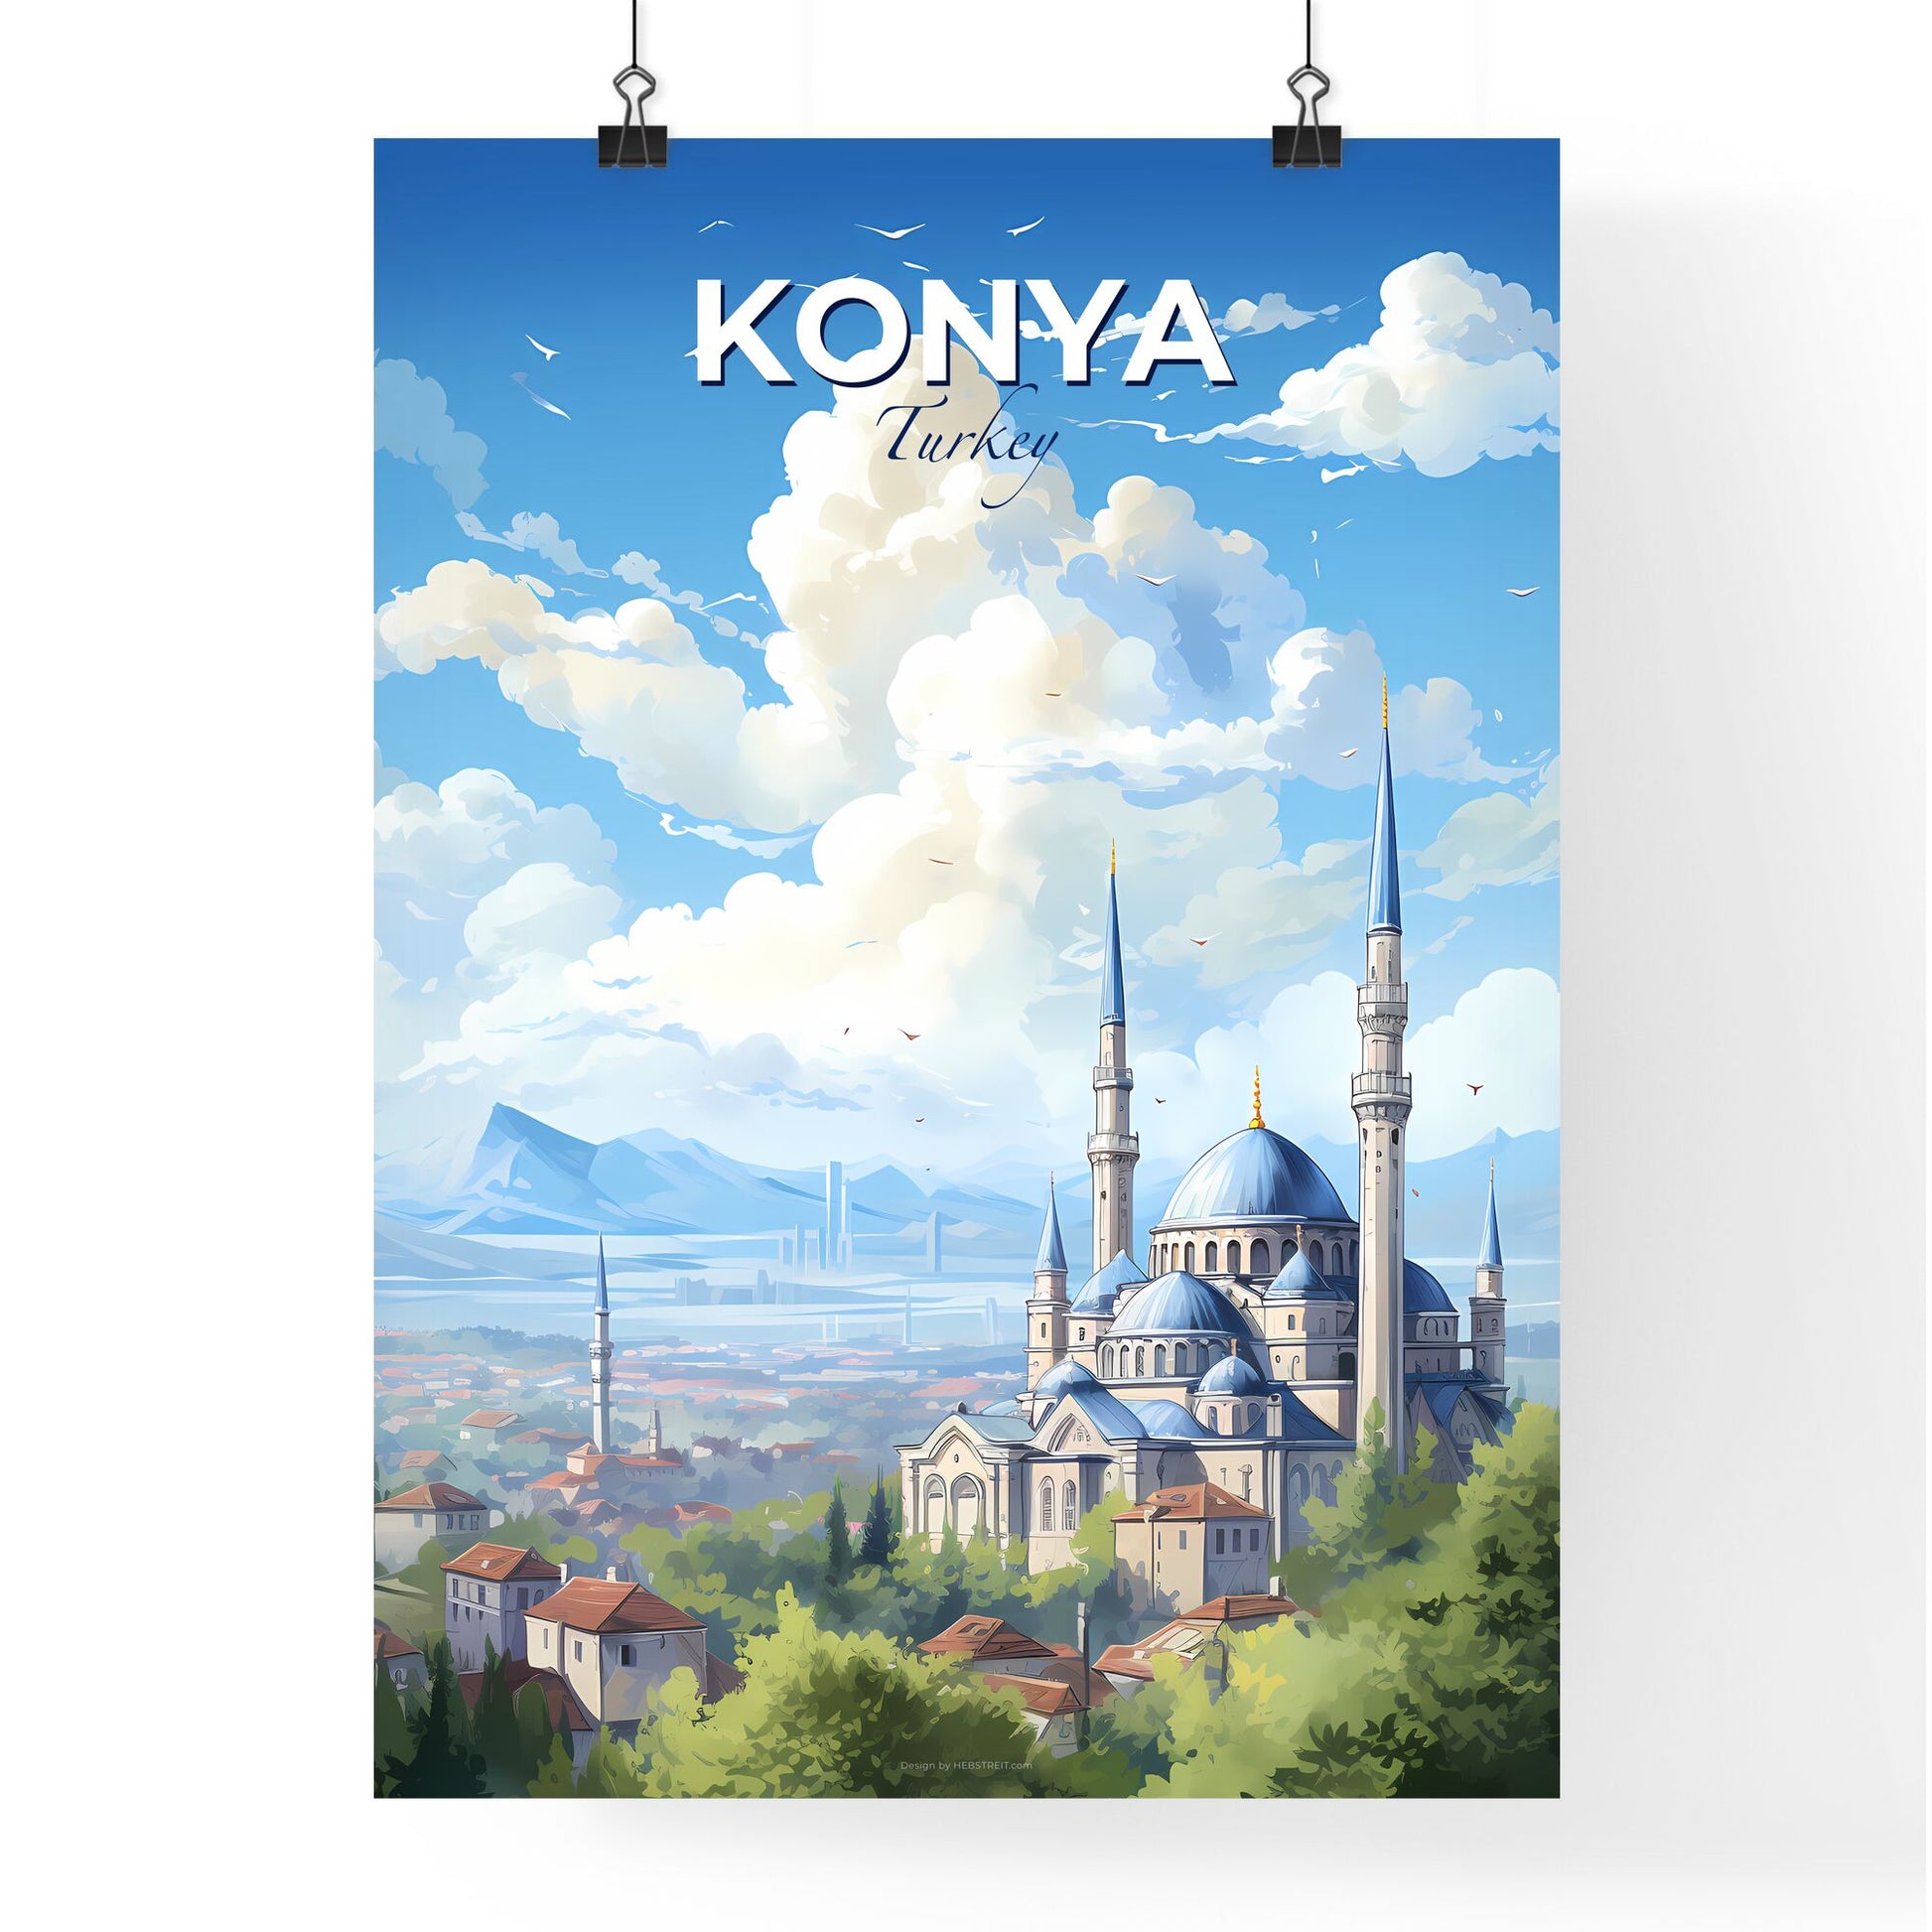 Konya Turkey Skyline - A Building With Towers And A City In The Background - Customizable Travel Gift Default Title